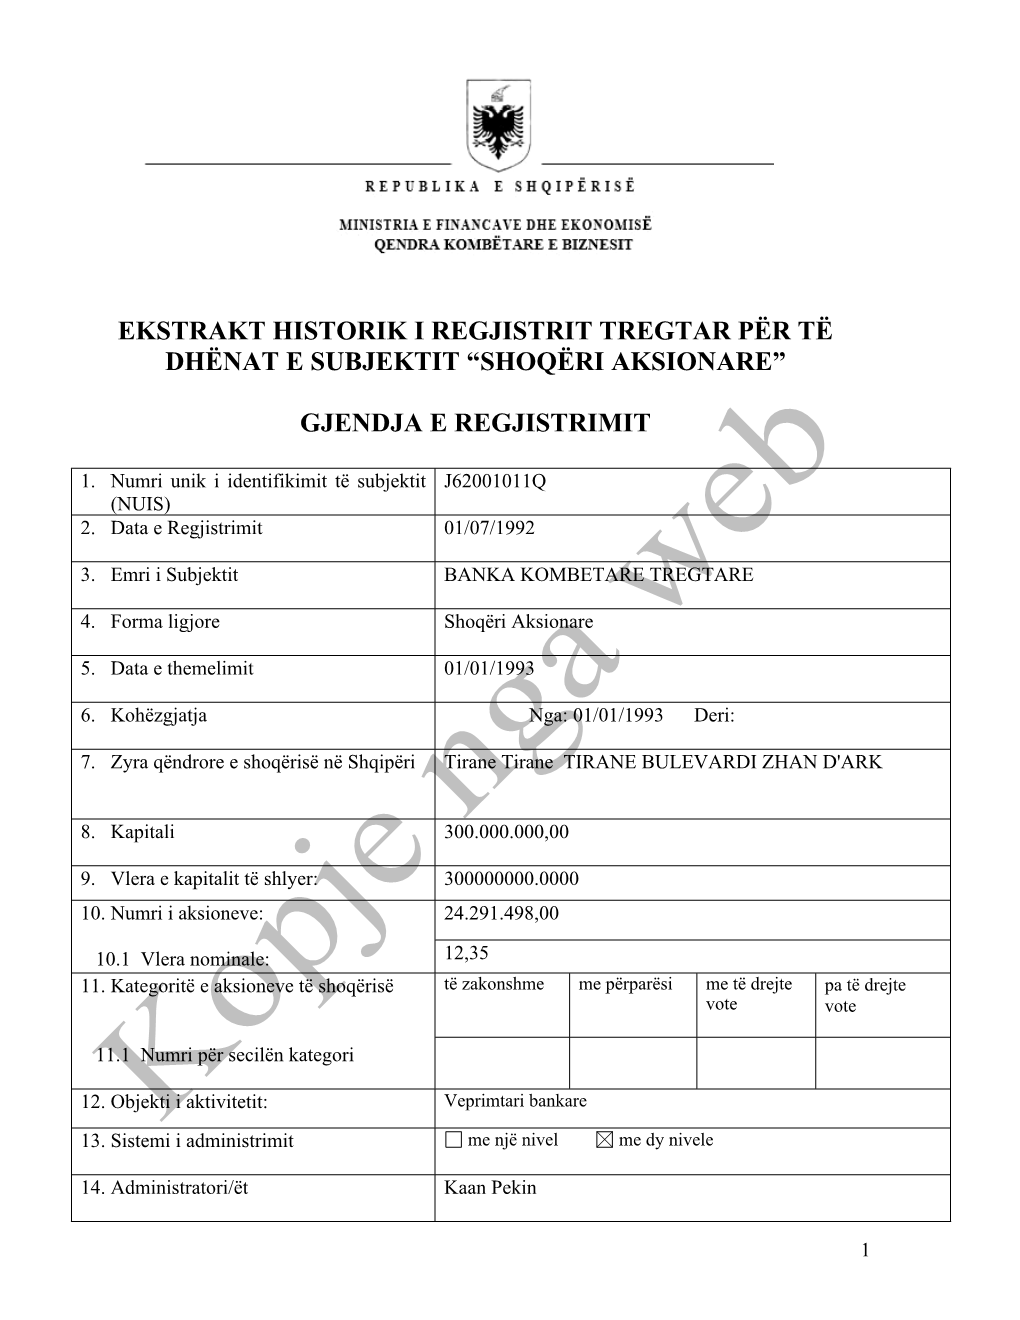 Extract Form of a Registered Business